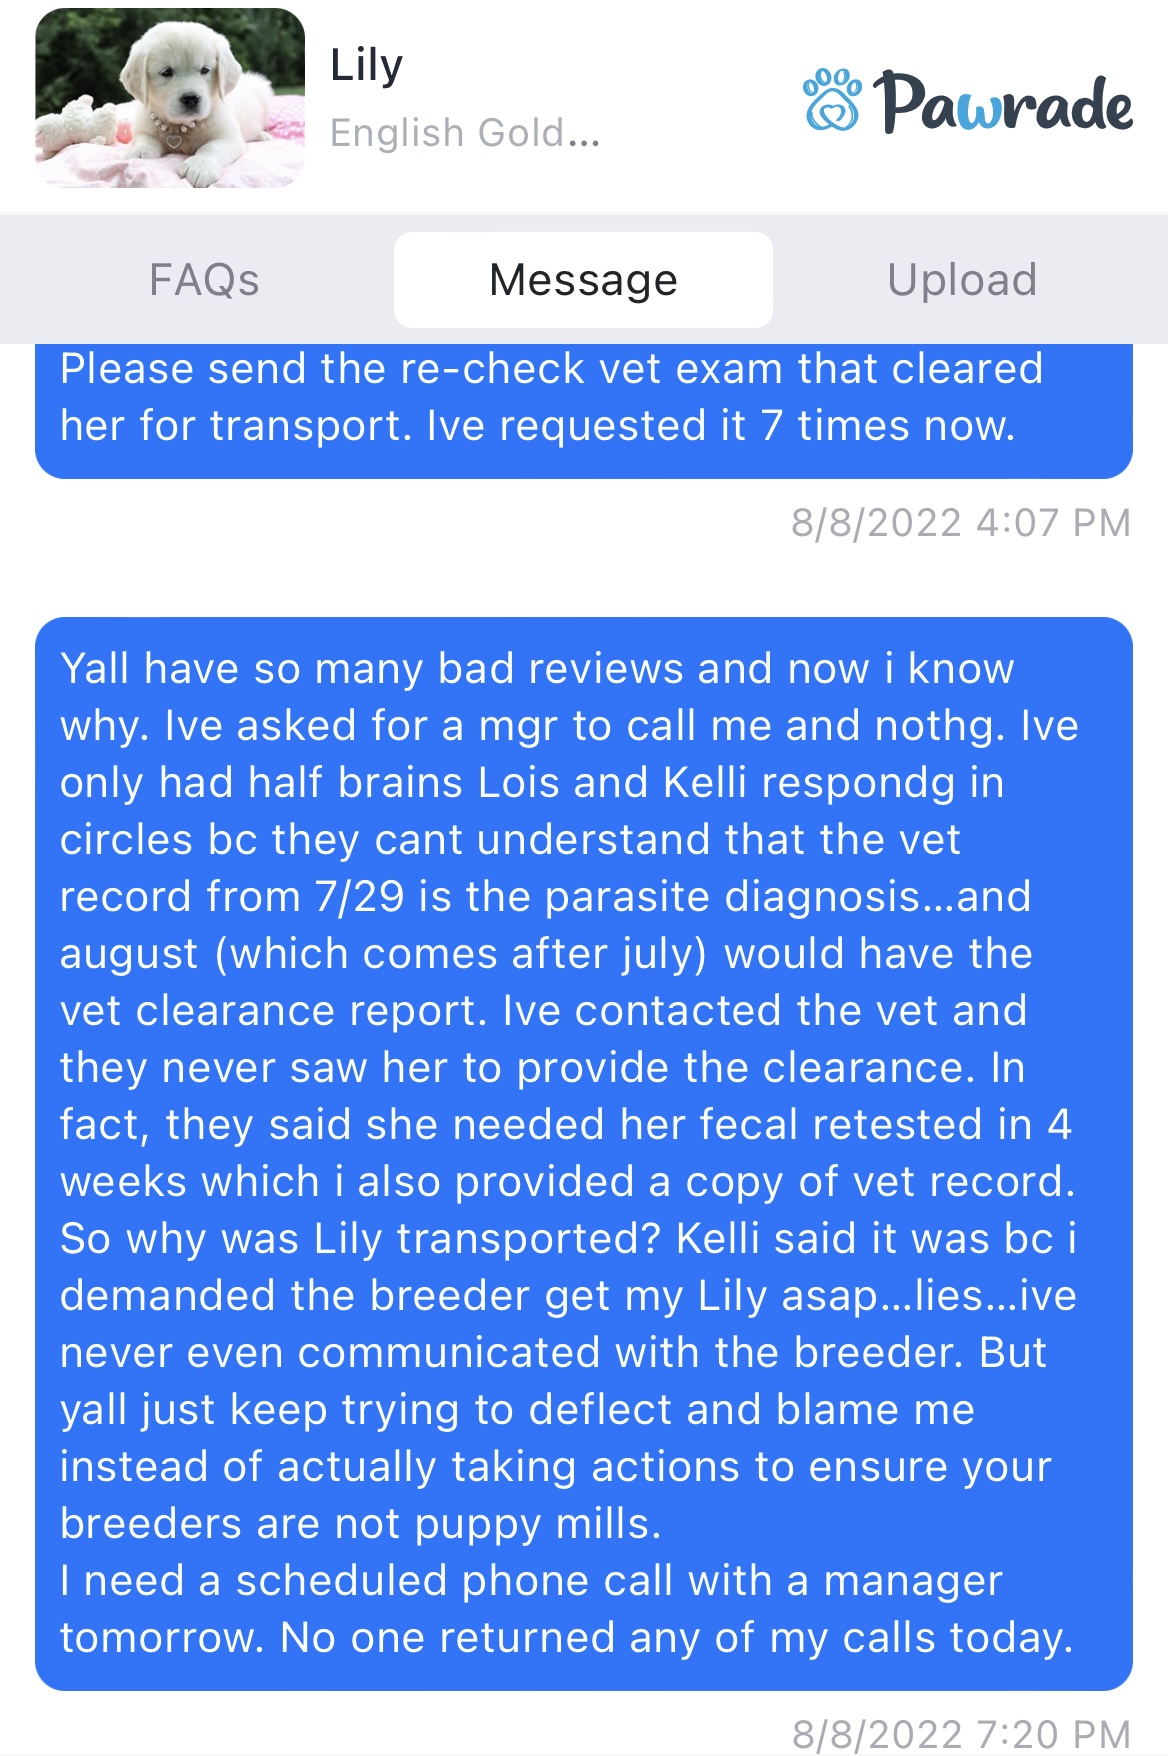 Never received 'cleared vet' 